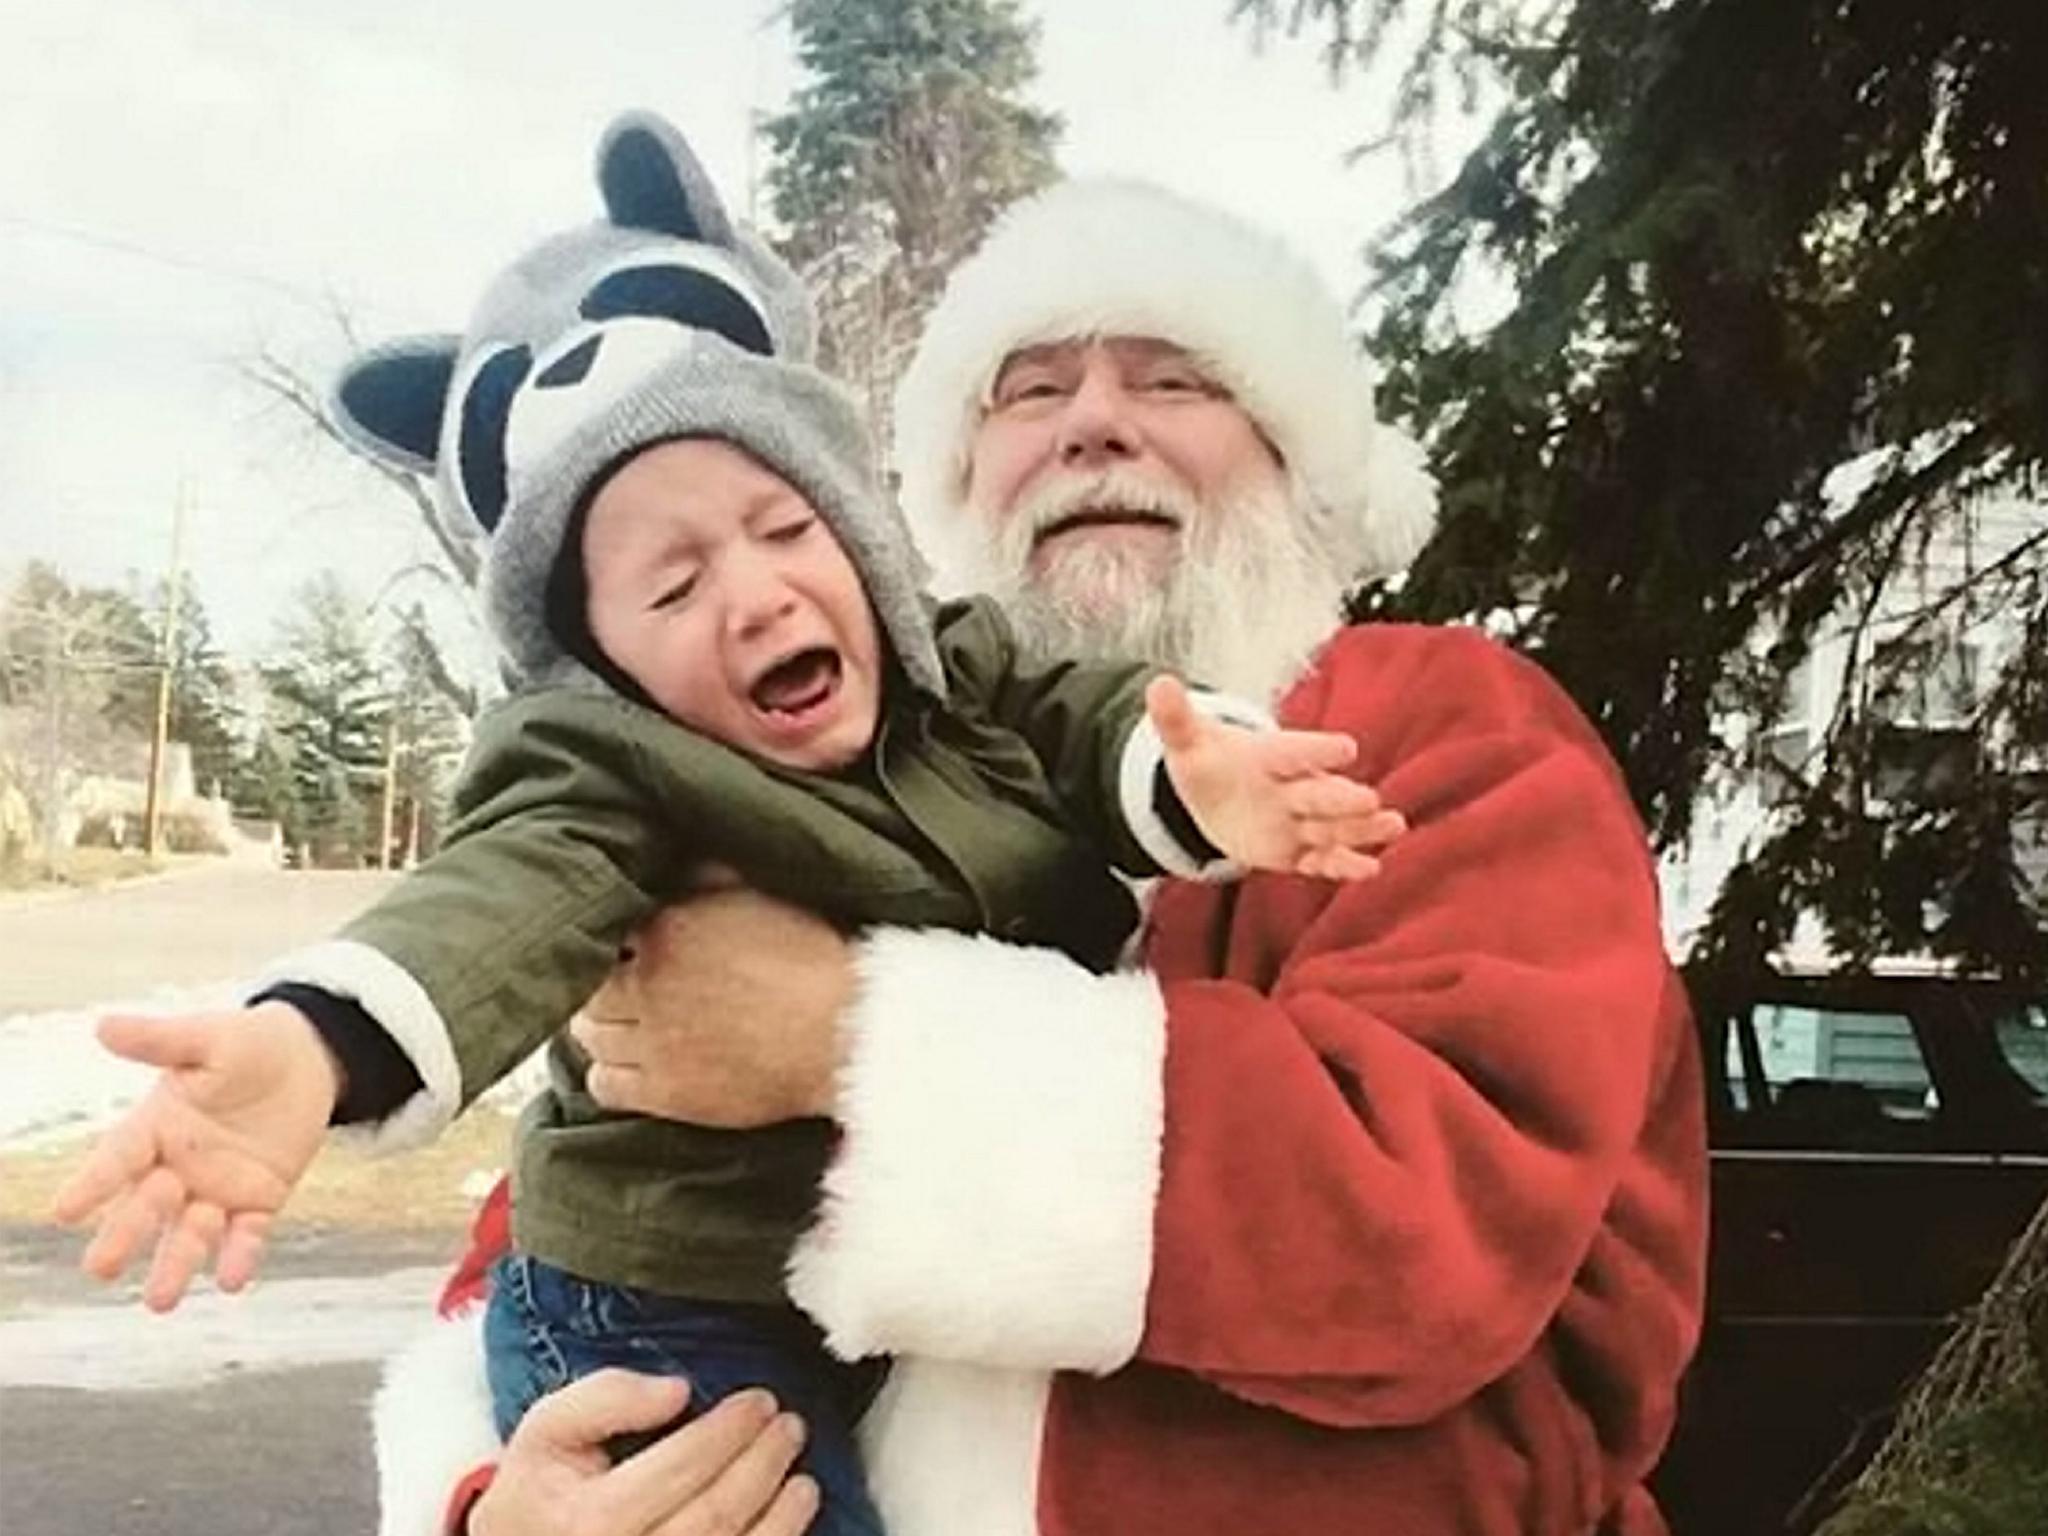 Rowan Hayes DeTray, one of the children whose meeting with Santa didn't result in the happy snapshot their parents were hoping for